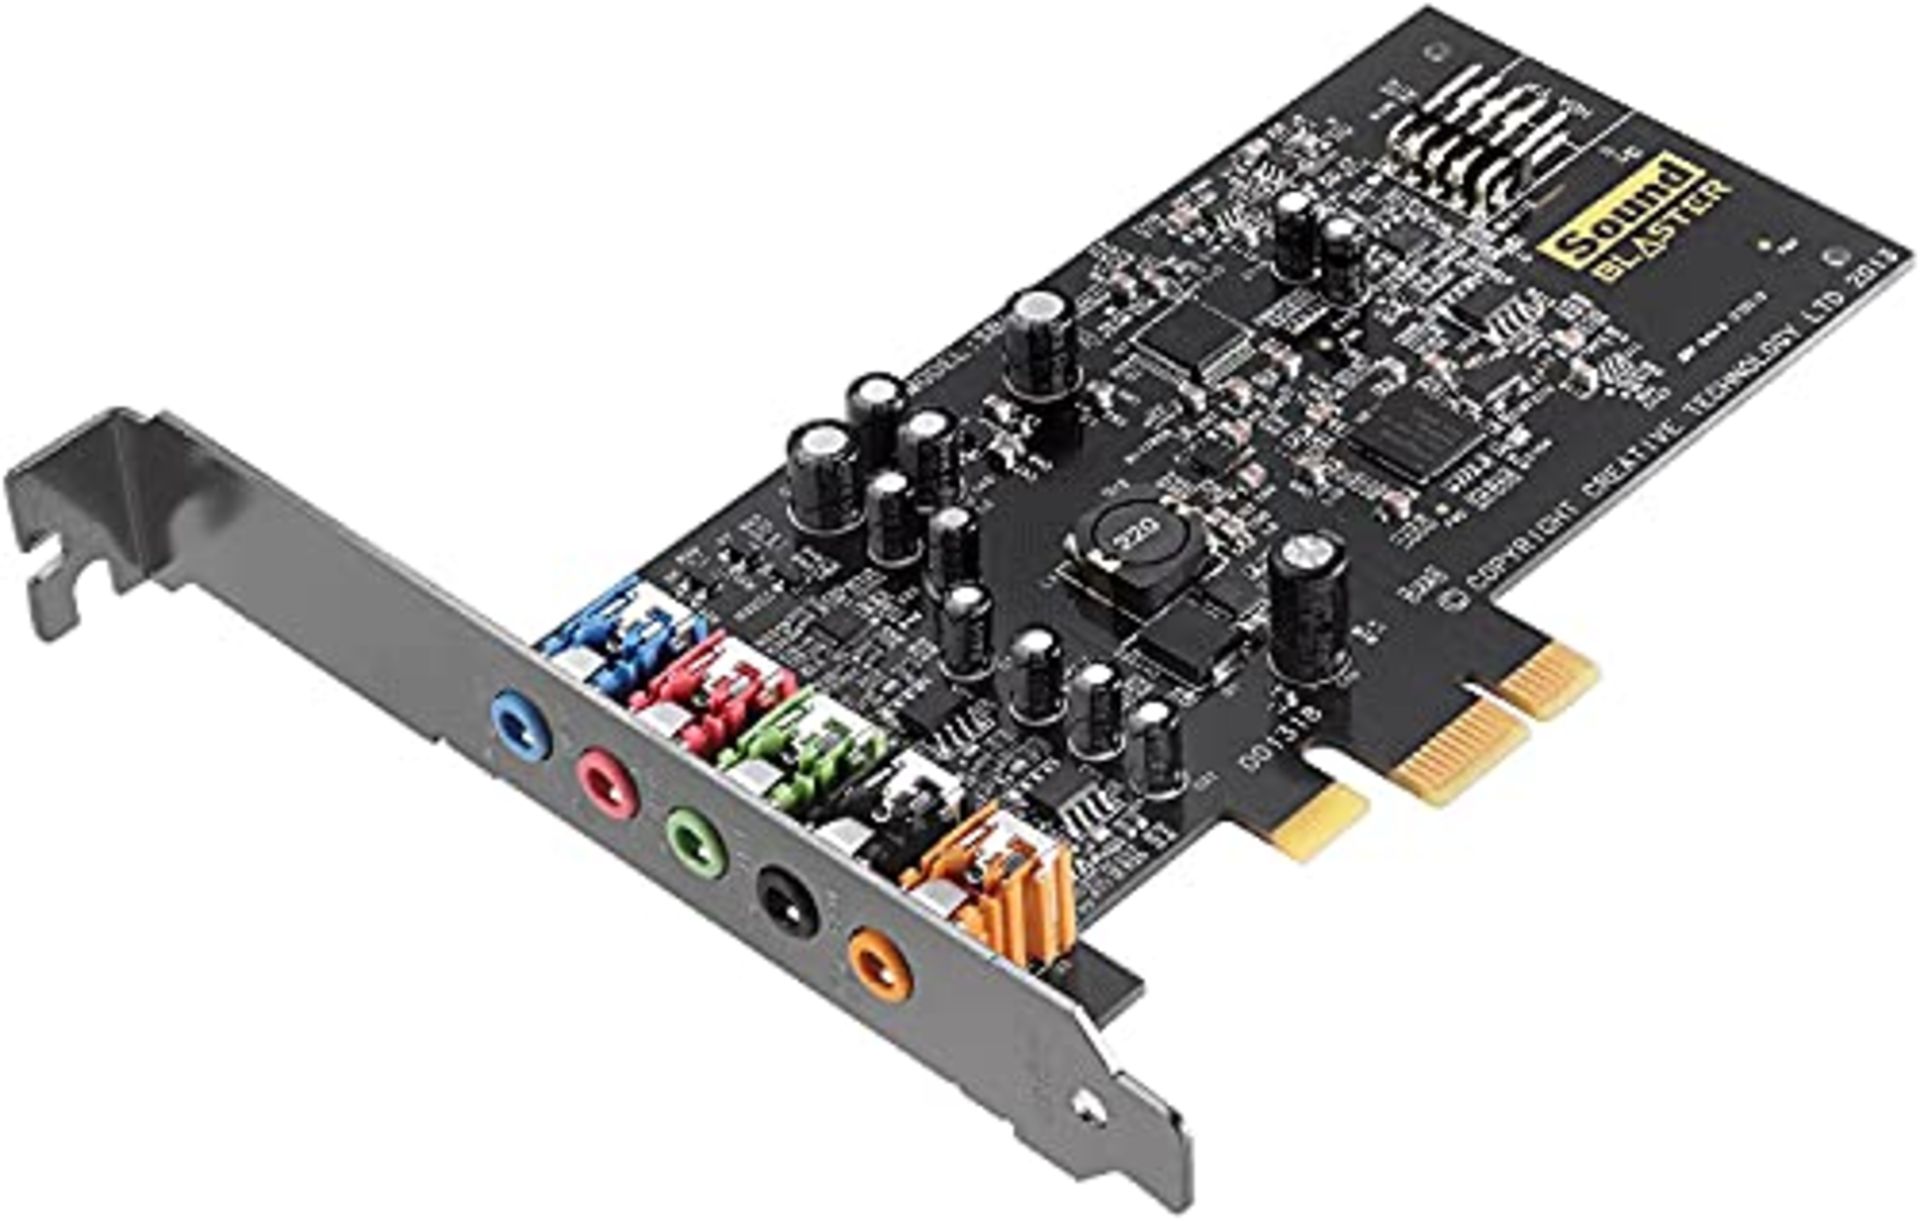 Creative Sound Blaster Audigy FX is a sound card that offers high-quality audio for yo